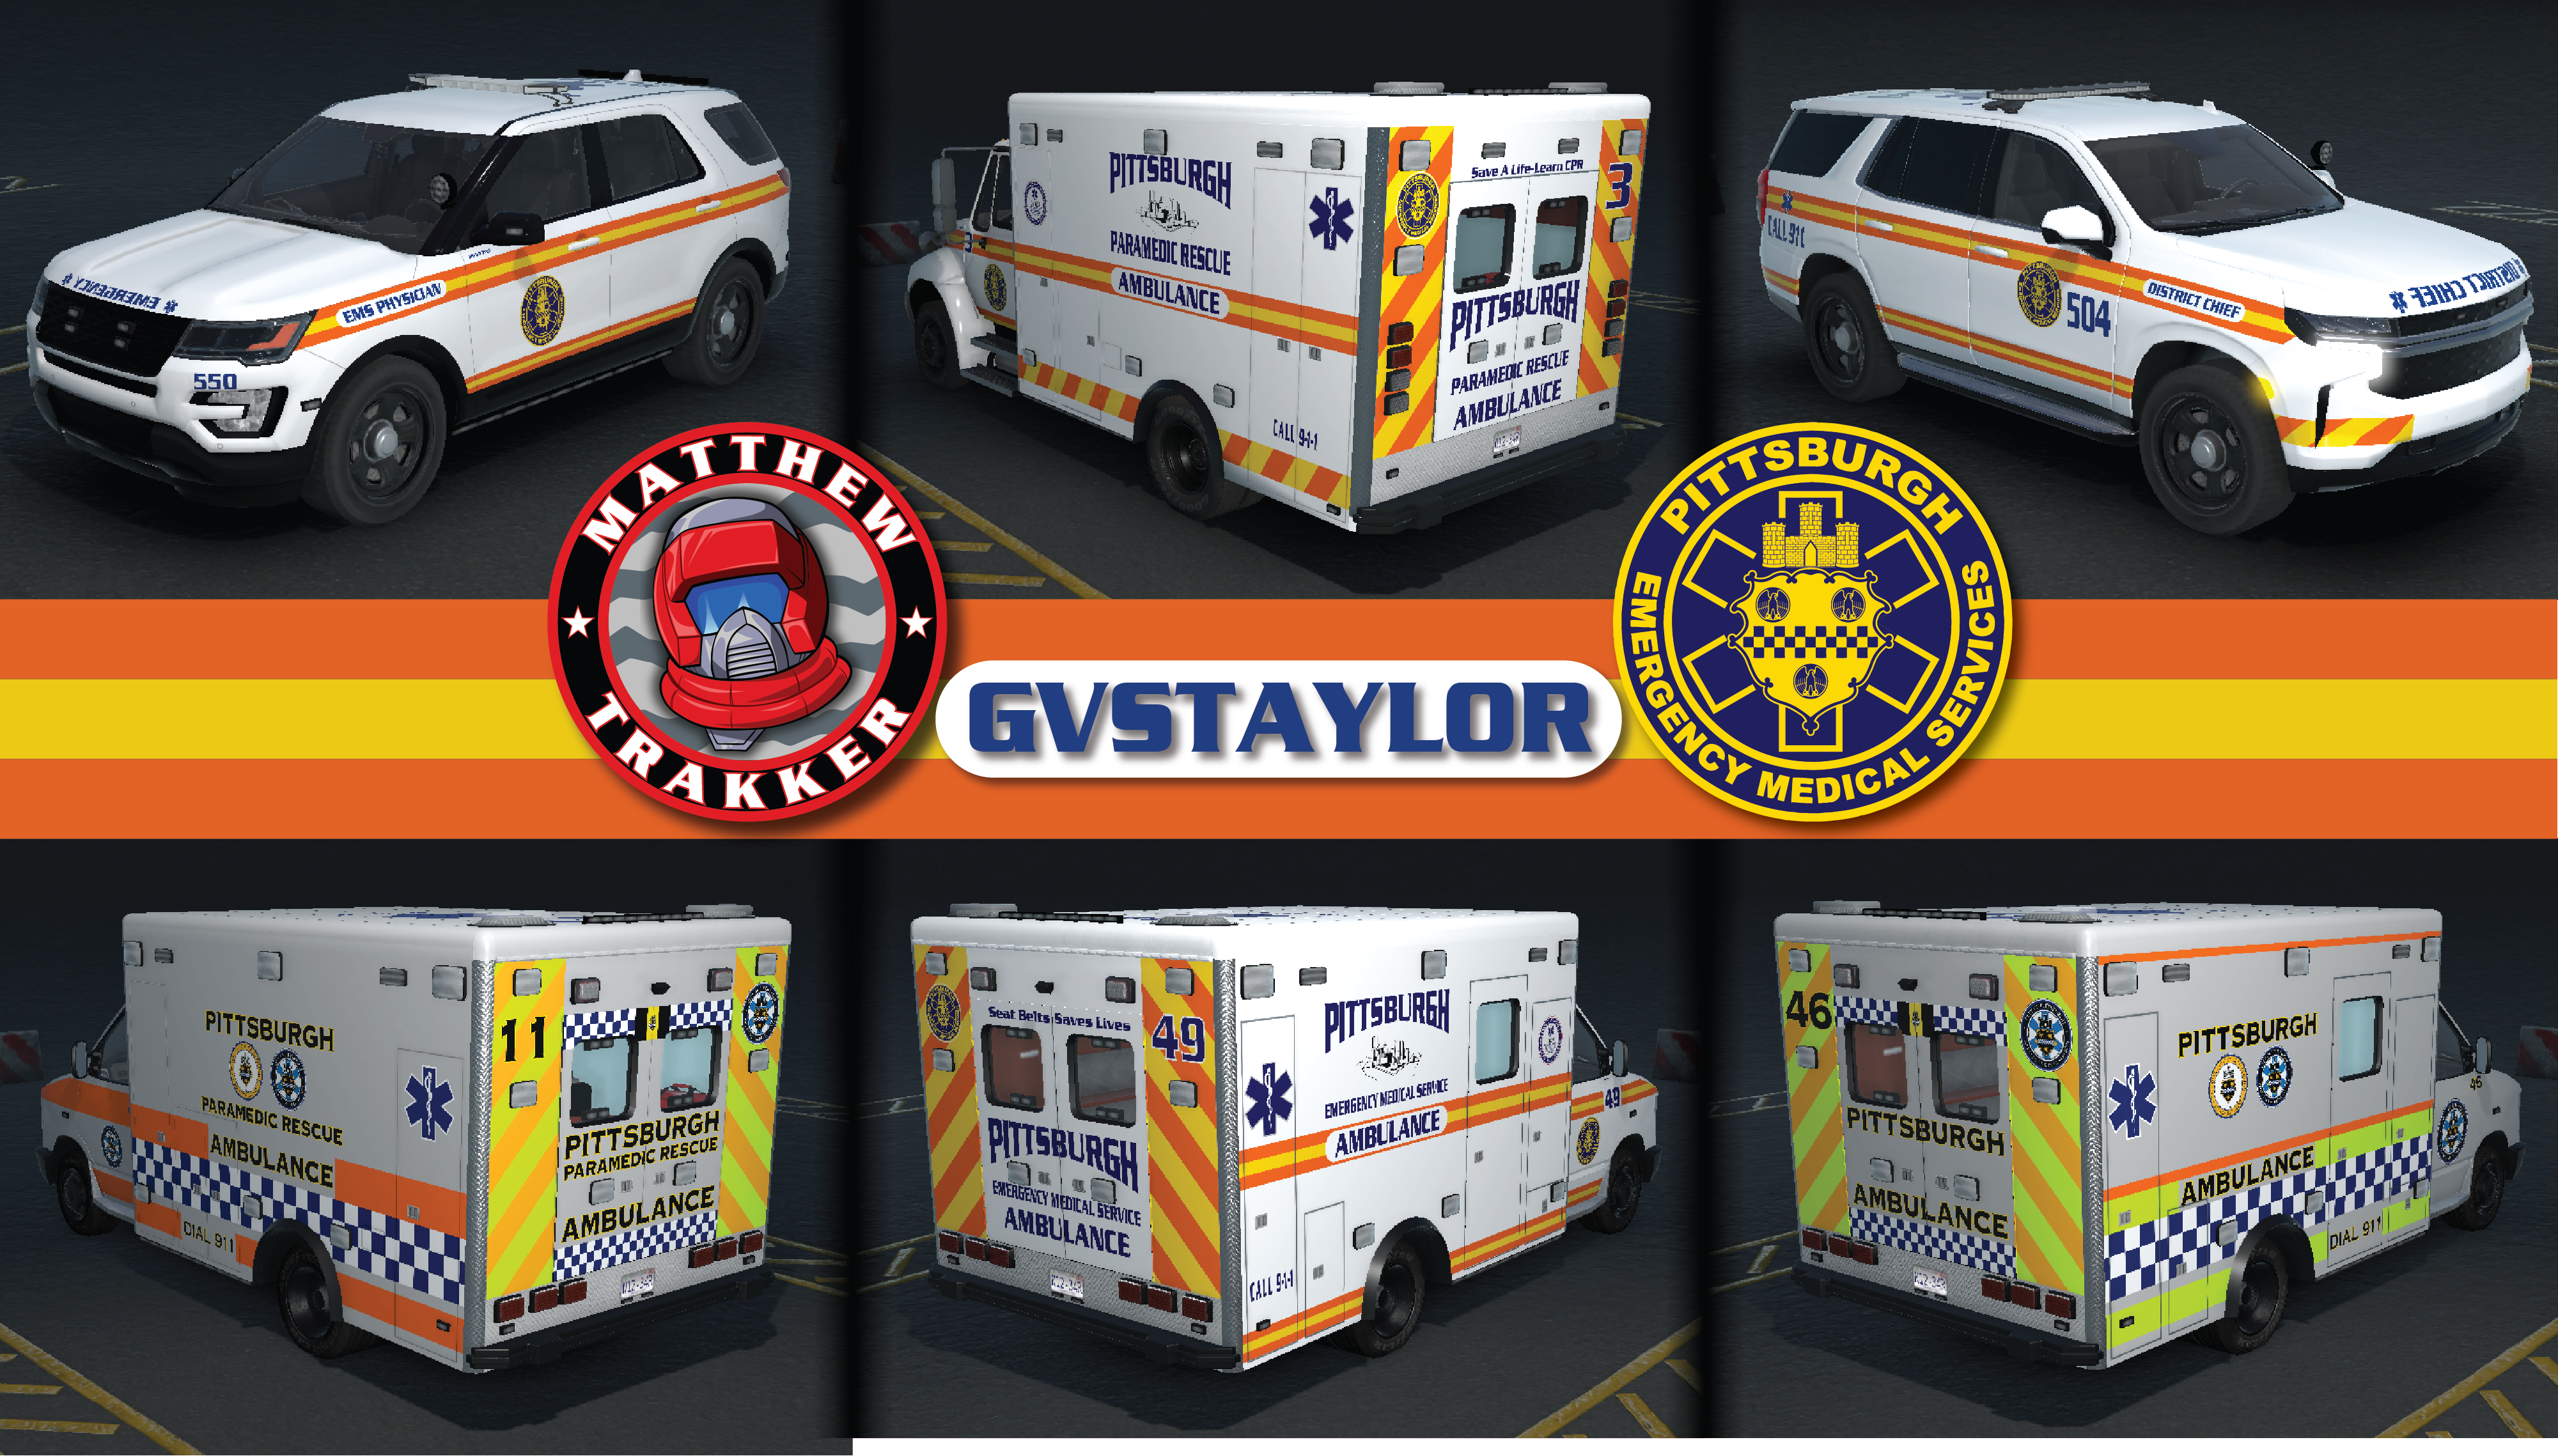 More information about "Pittsburgh EMS Vehicles - Pittsburgh, PA"